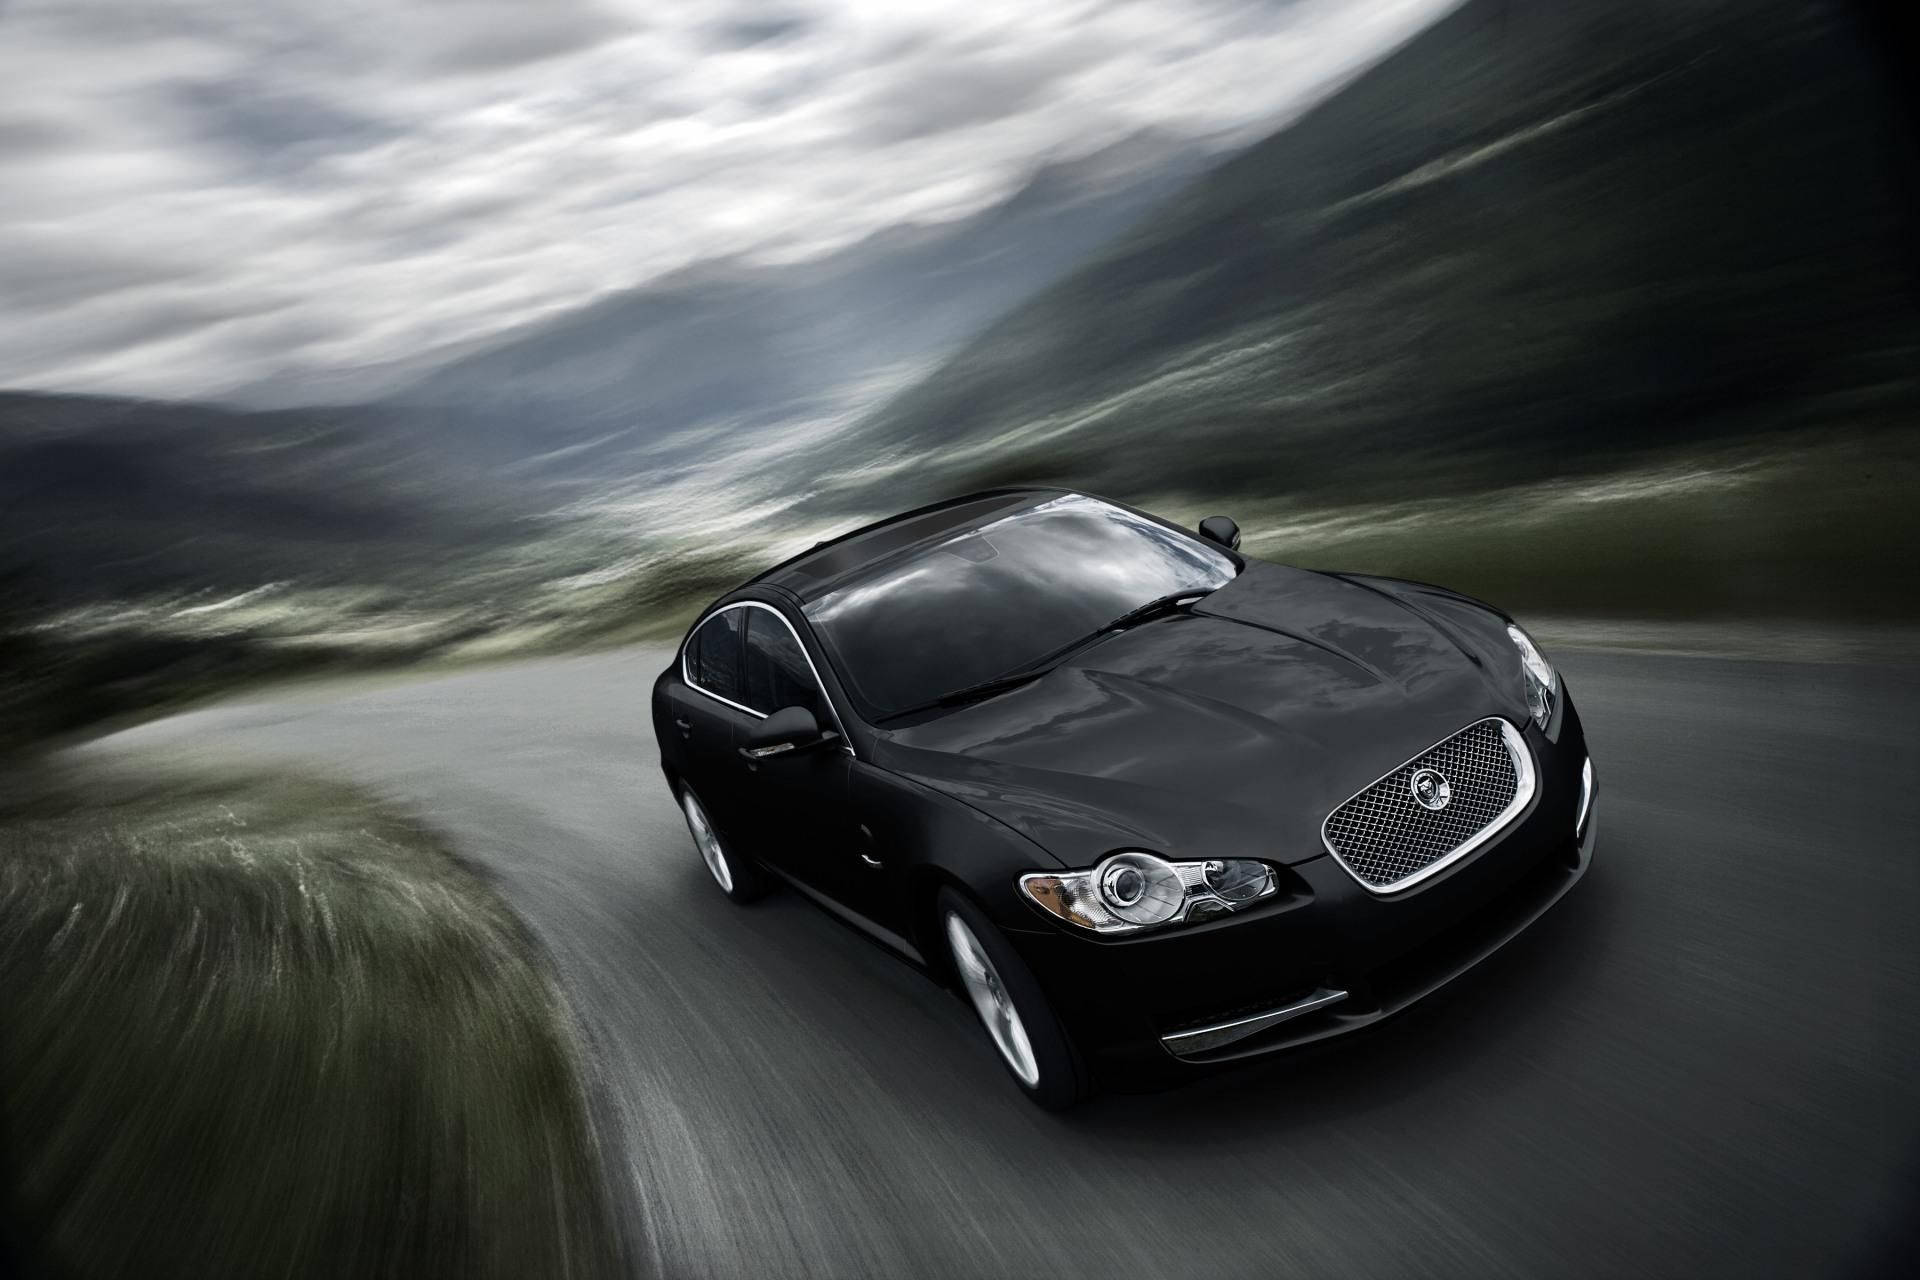 Speed And Style Combine In This Sleek Black Jaguar Car. Background